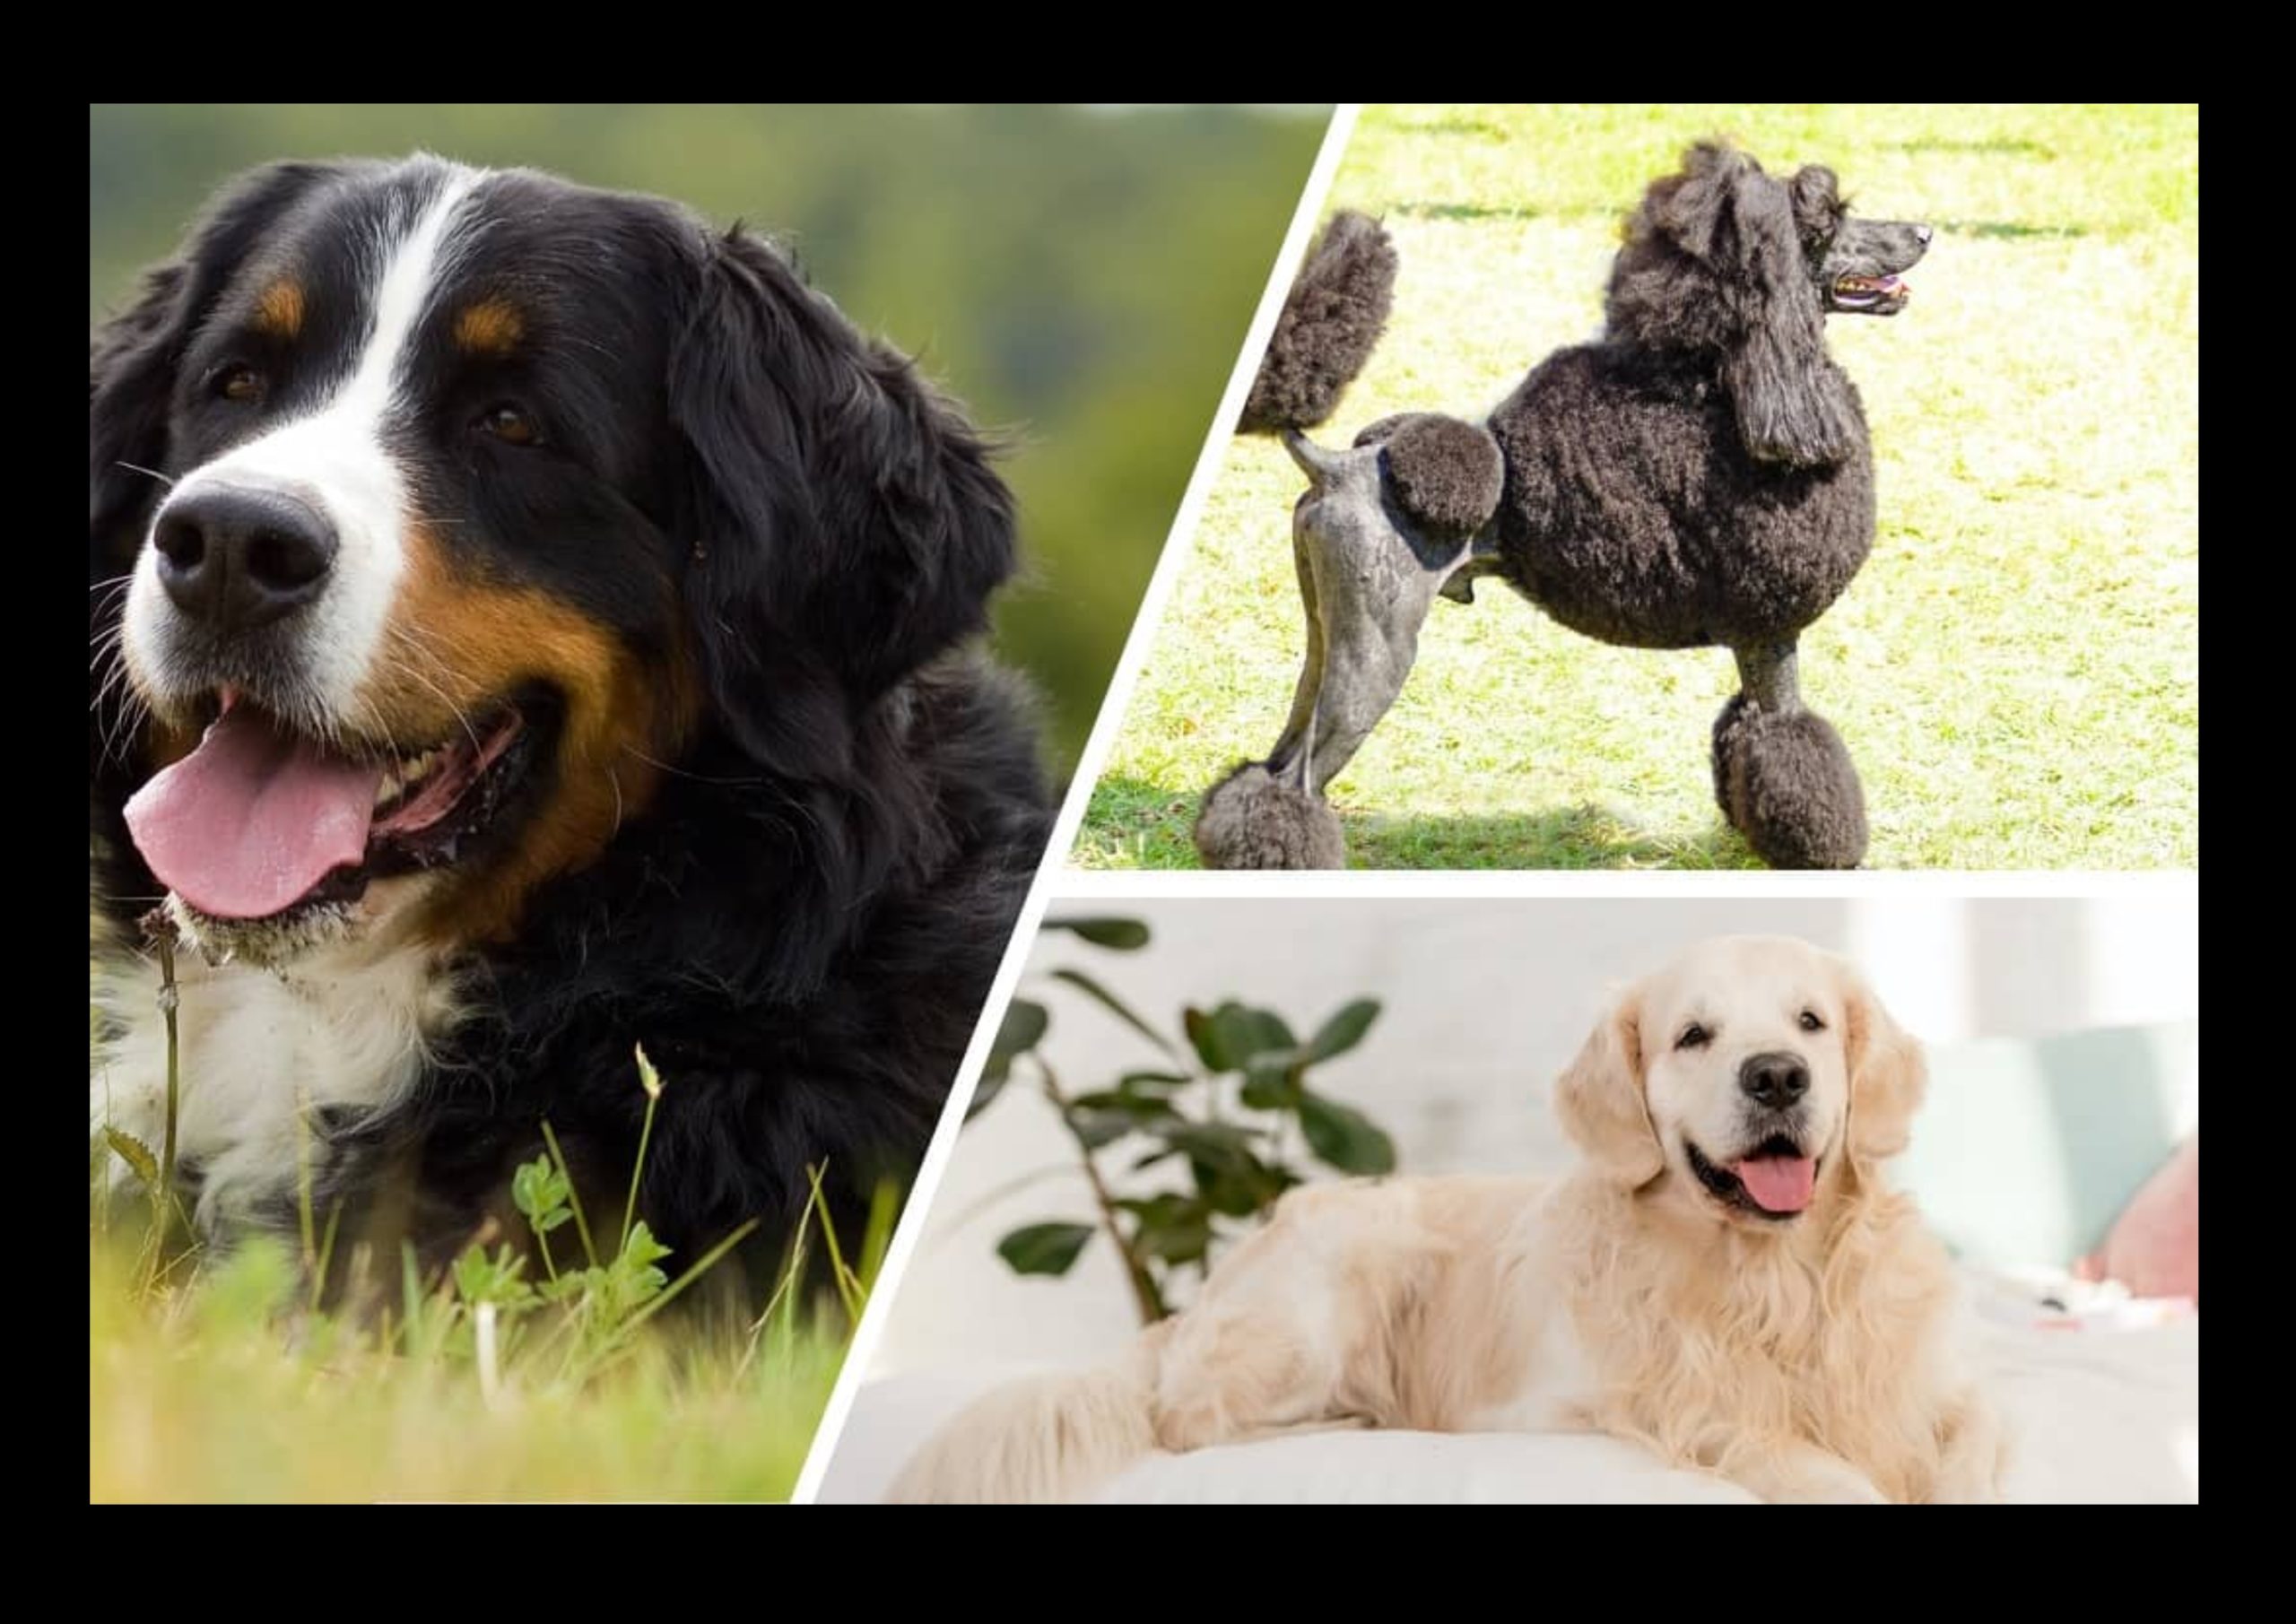 three images of dogs showing a poodle, a golden retriever and a bernese mountain dog